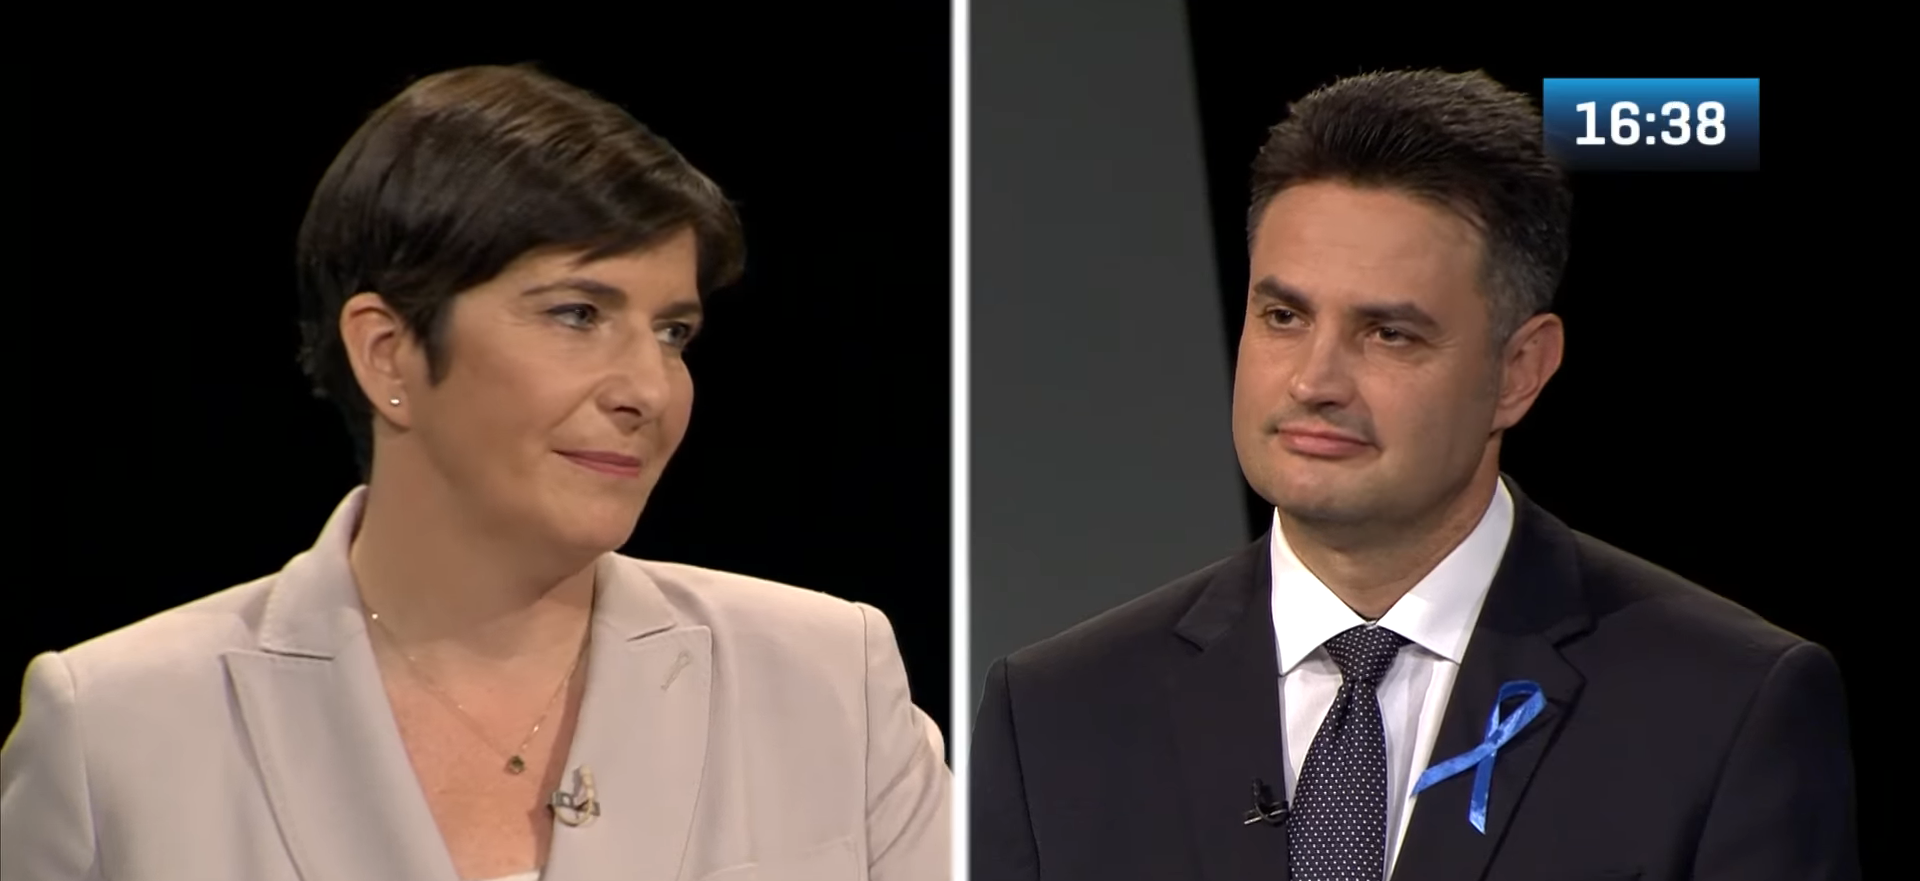 Opposition PM Candidates in Third Debate Promise to Help Winner's Campaign after Primaries